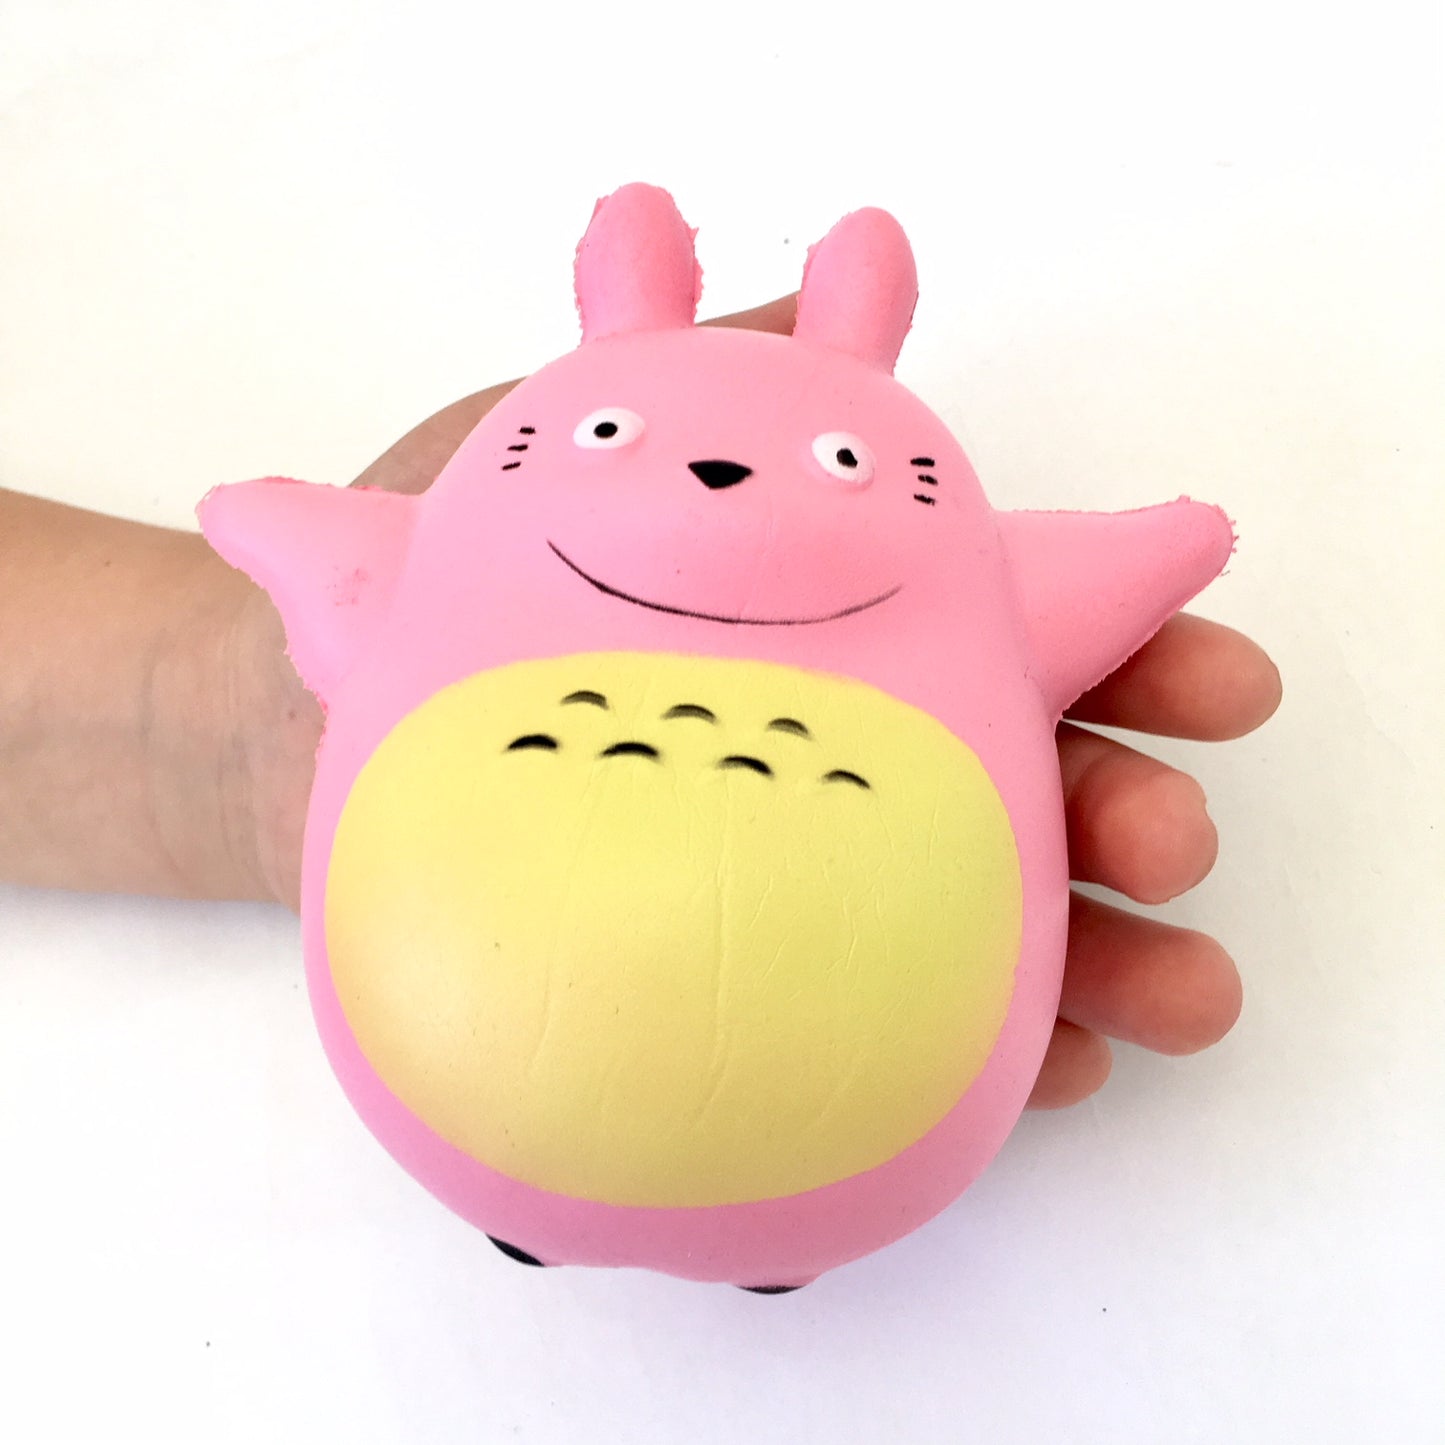 X 83237 PINK TOTORO SQUISHY-5.25 inch-slowrise soft-DISCONTINUED